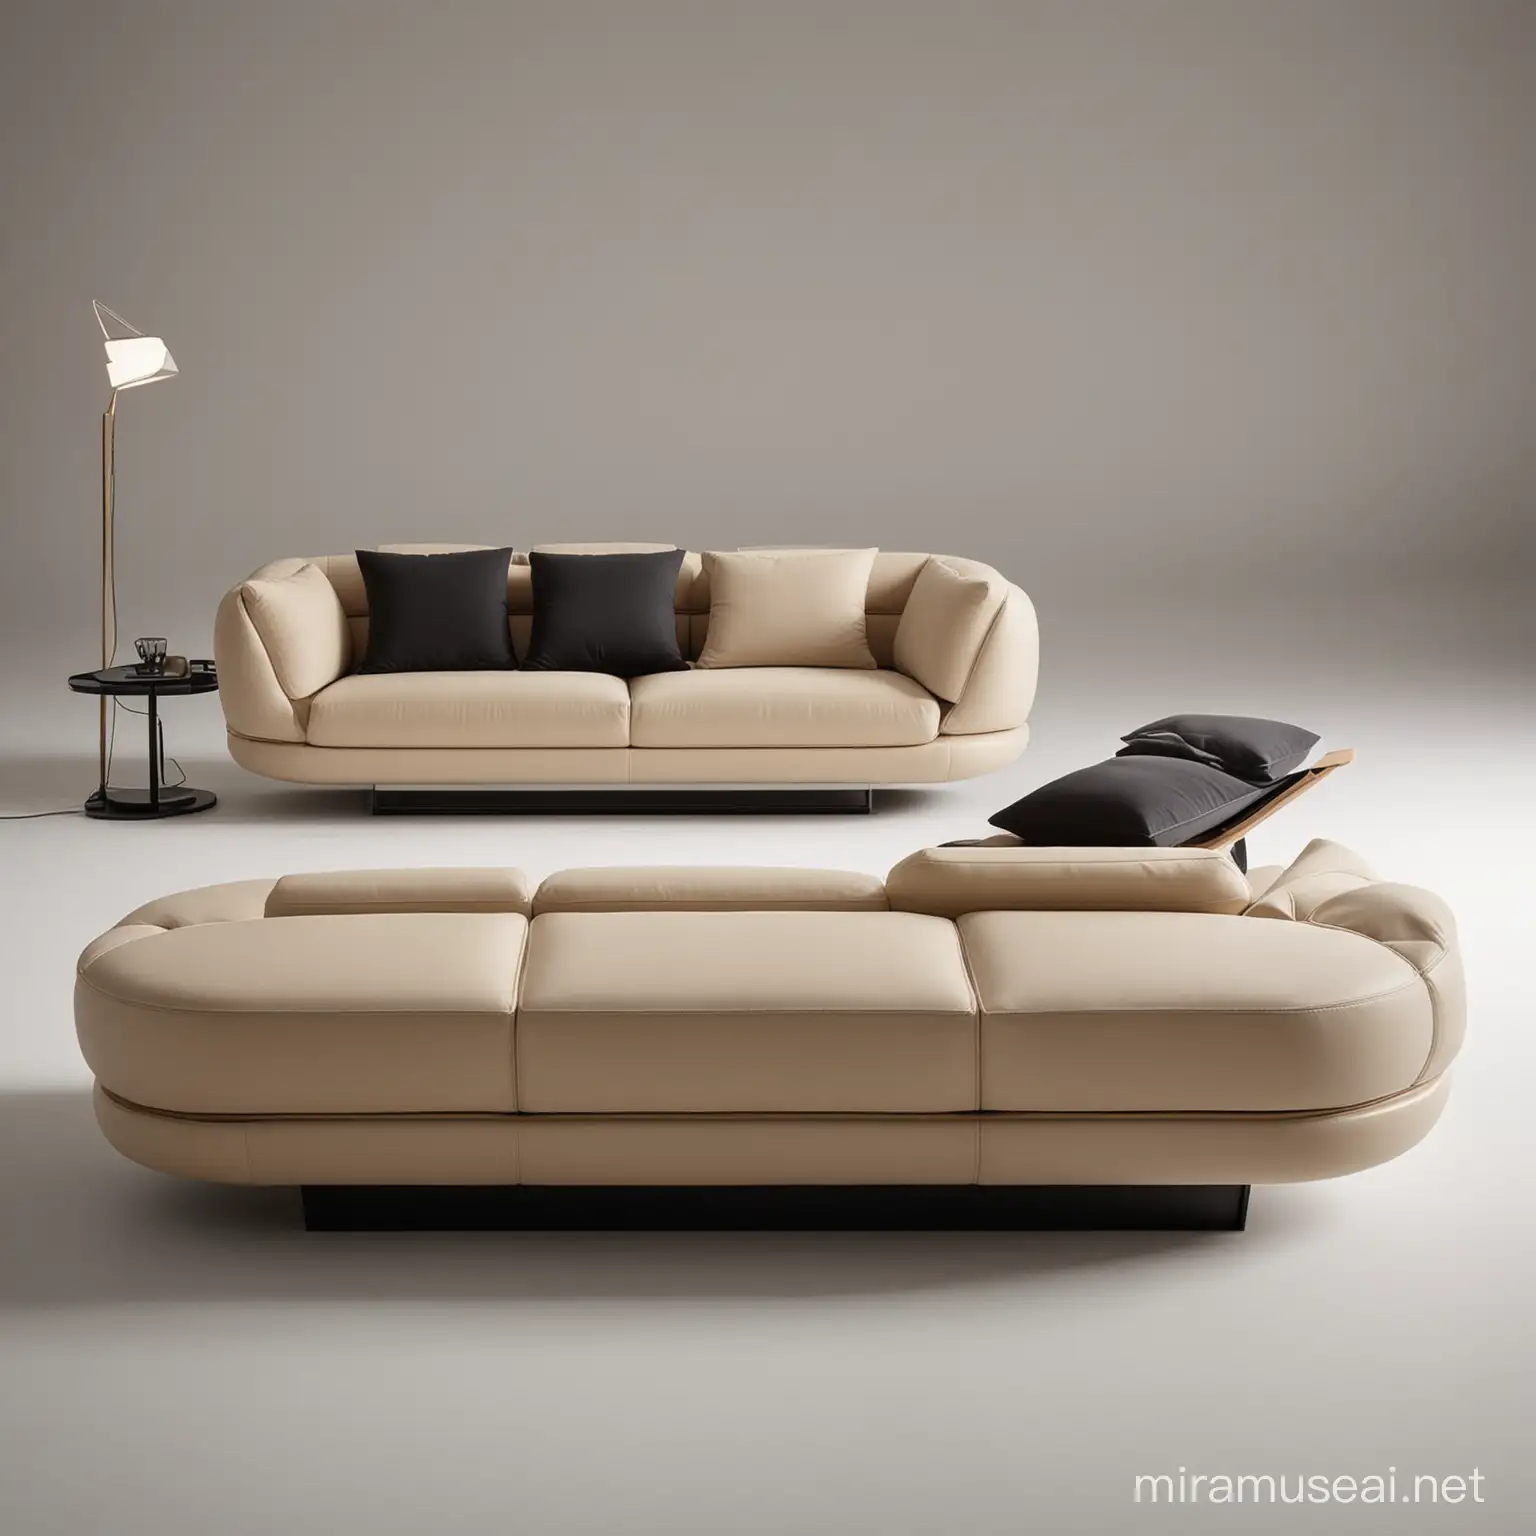 Innovative Italian Modular Sofa Design A Blend of Functionality and Style for Small Spaces